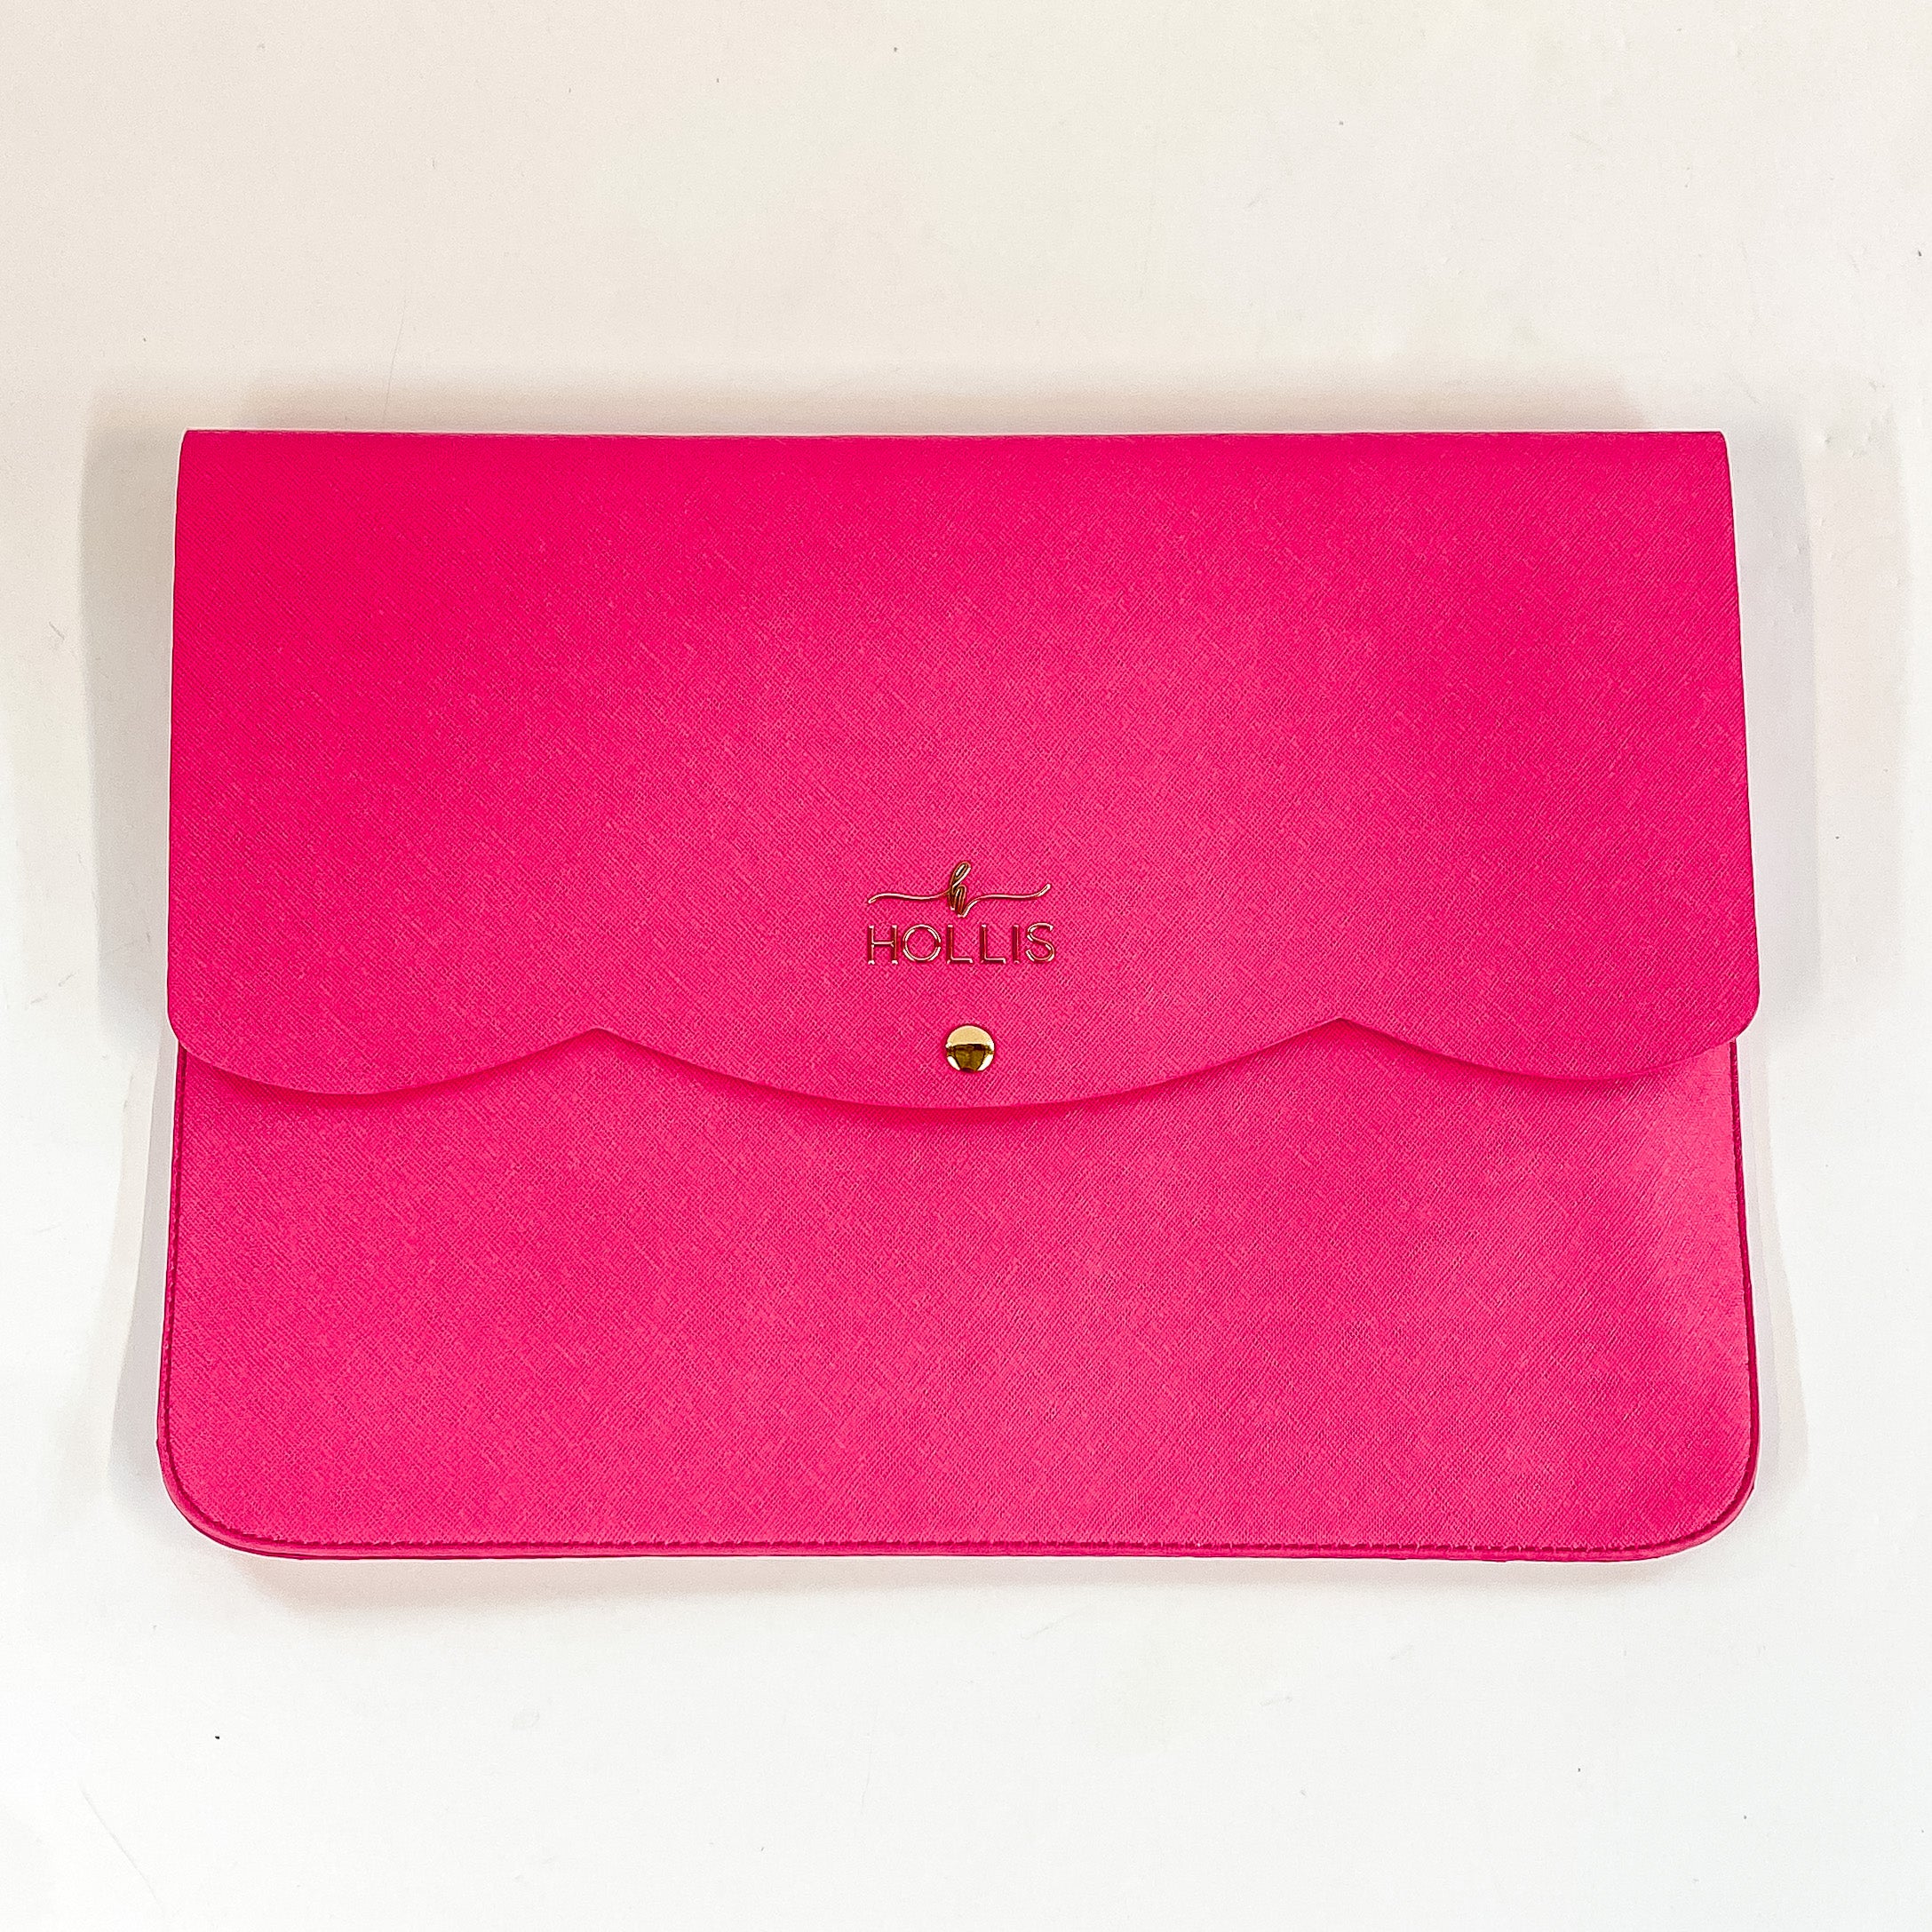 Hollis brand hot pink laptop sleeve. Opens and buttons down in the front. Pictured on a white background.